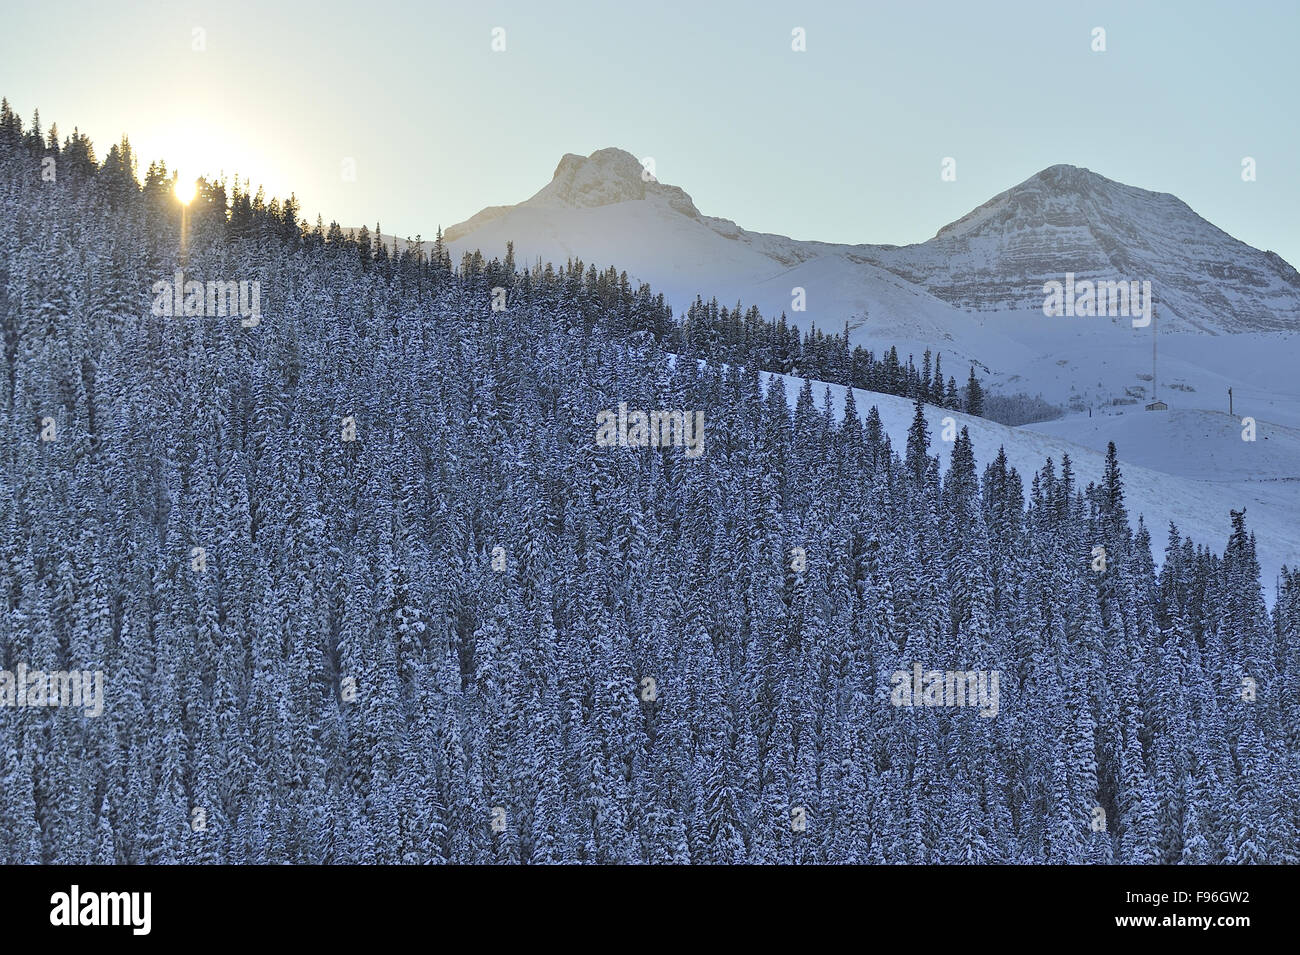 A late afternoon landscape image of the sun sinking behind a forest of spruce trees on a hillside near Cadomine Alberta Canada Stock Photo